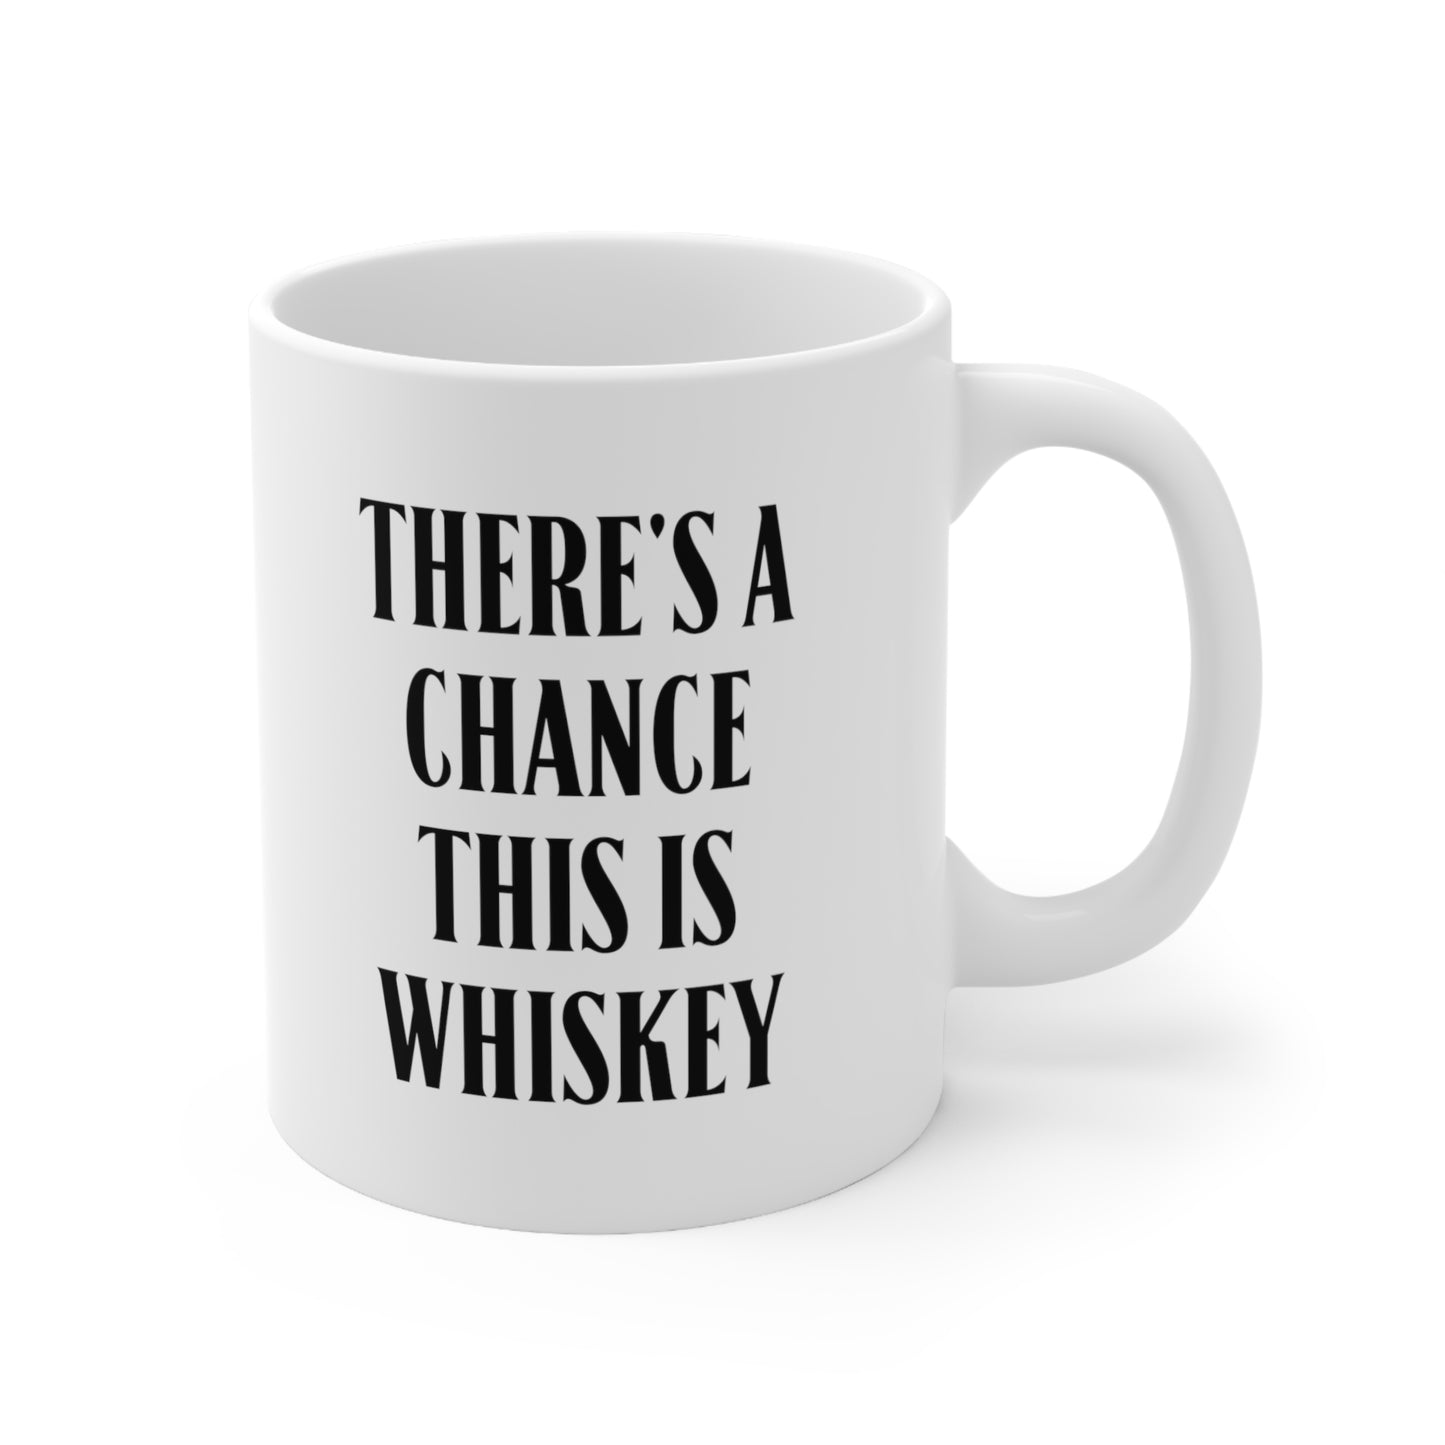 There's a chance this is whiskey Coffee Mug 11oz